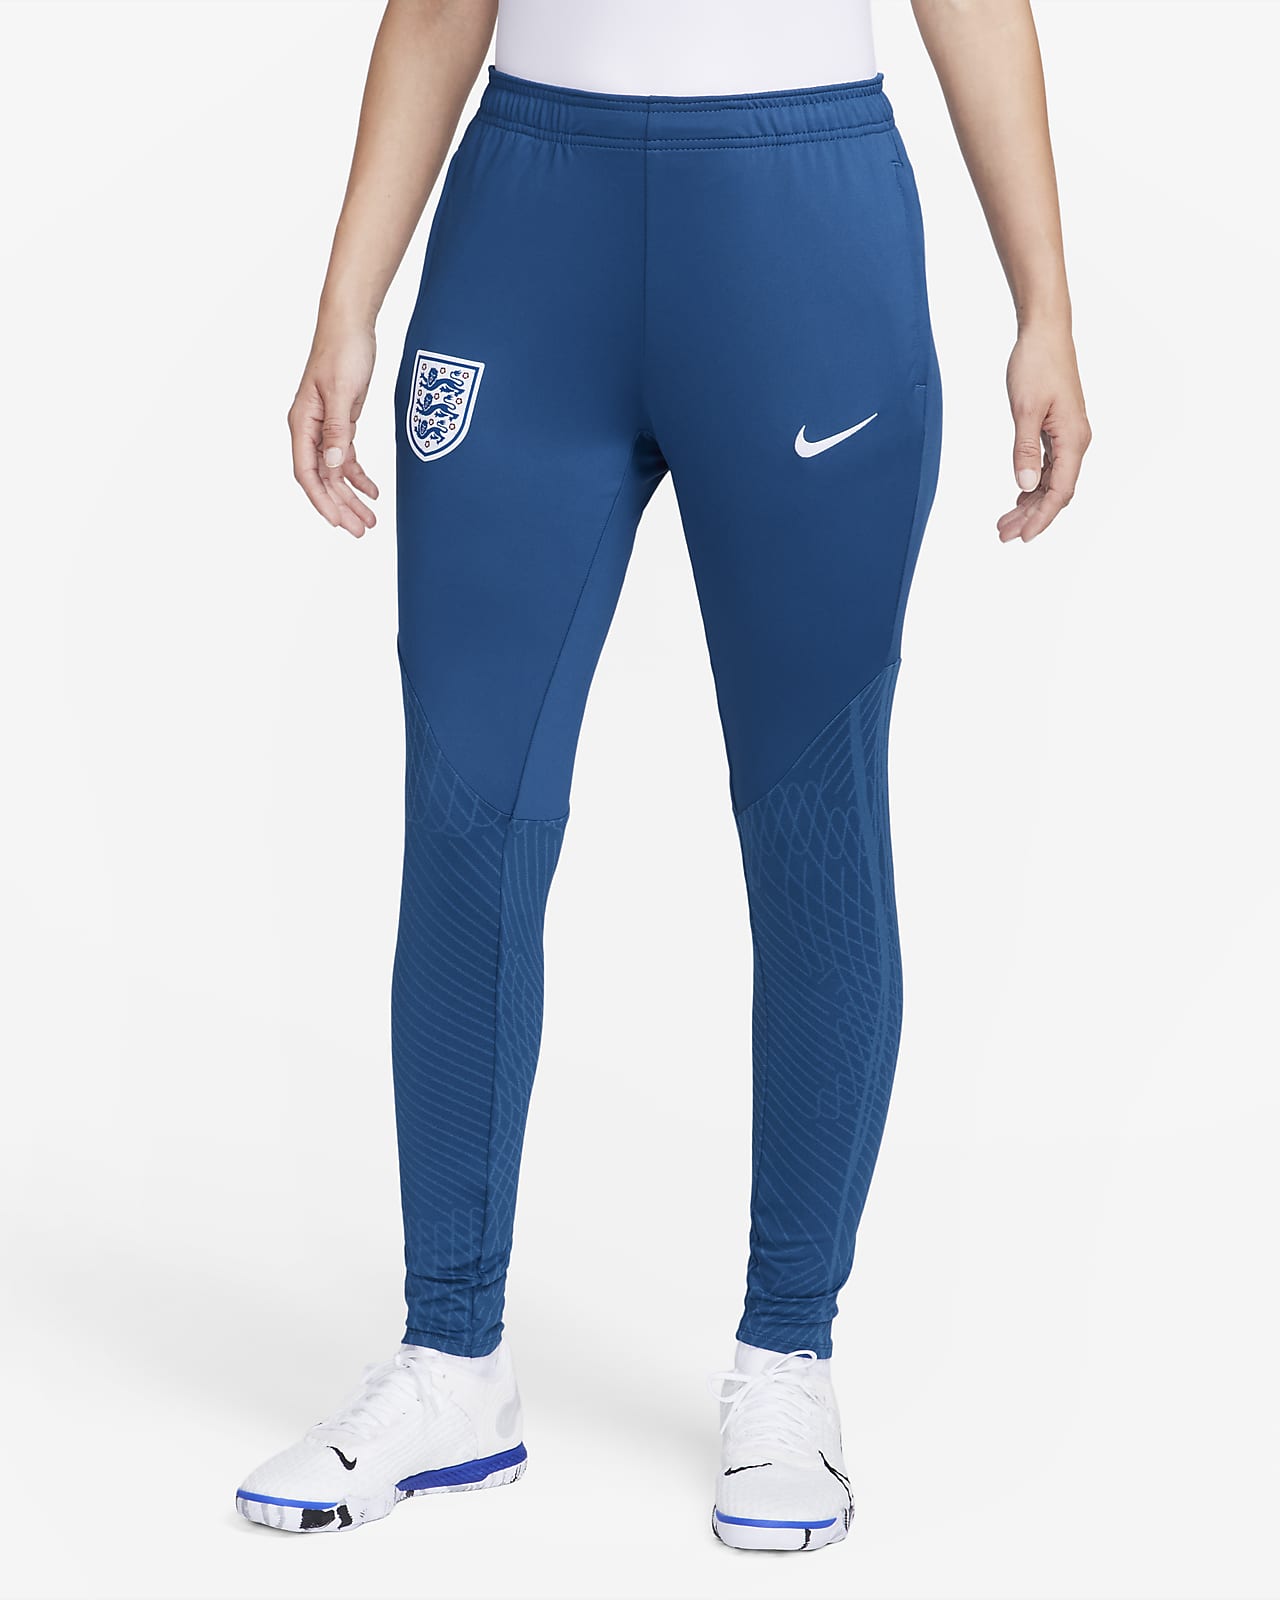 https://static.nike.com/a/images/t_PDP_1280_v1/f_auto,q_auto:eco/5751c8a4-1f6c-4bc4-b46f-8c8ae4864333/england-strike-dri-fit-knit-football-pants-SDc8Tx.png